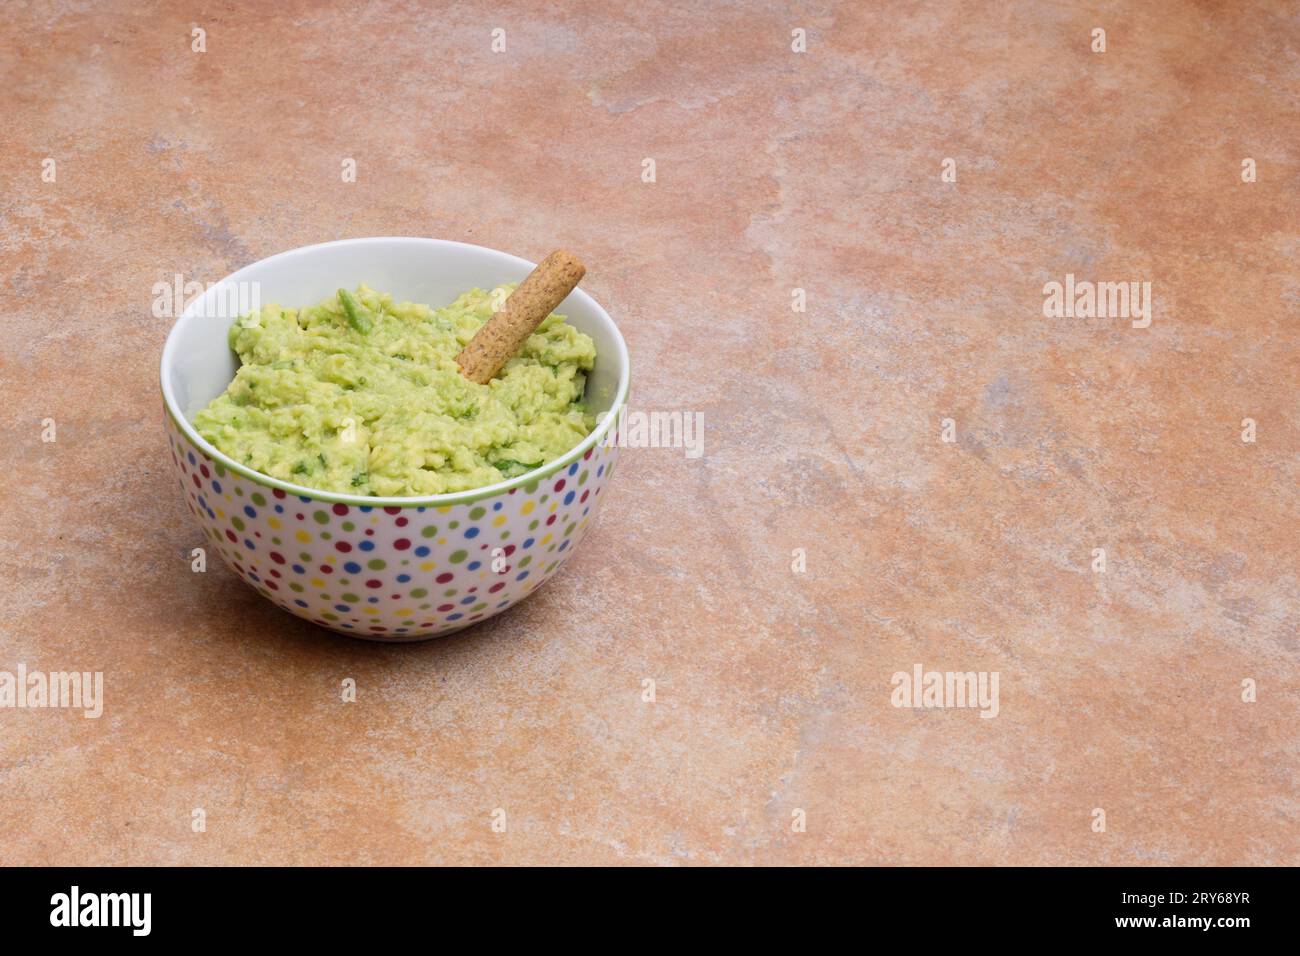 A long shot of a stone-tiled countertop with a bowl of homemade guacamole dip, decorated with colorful dots with copy space. Traditional food. Stock Photo